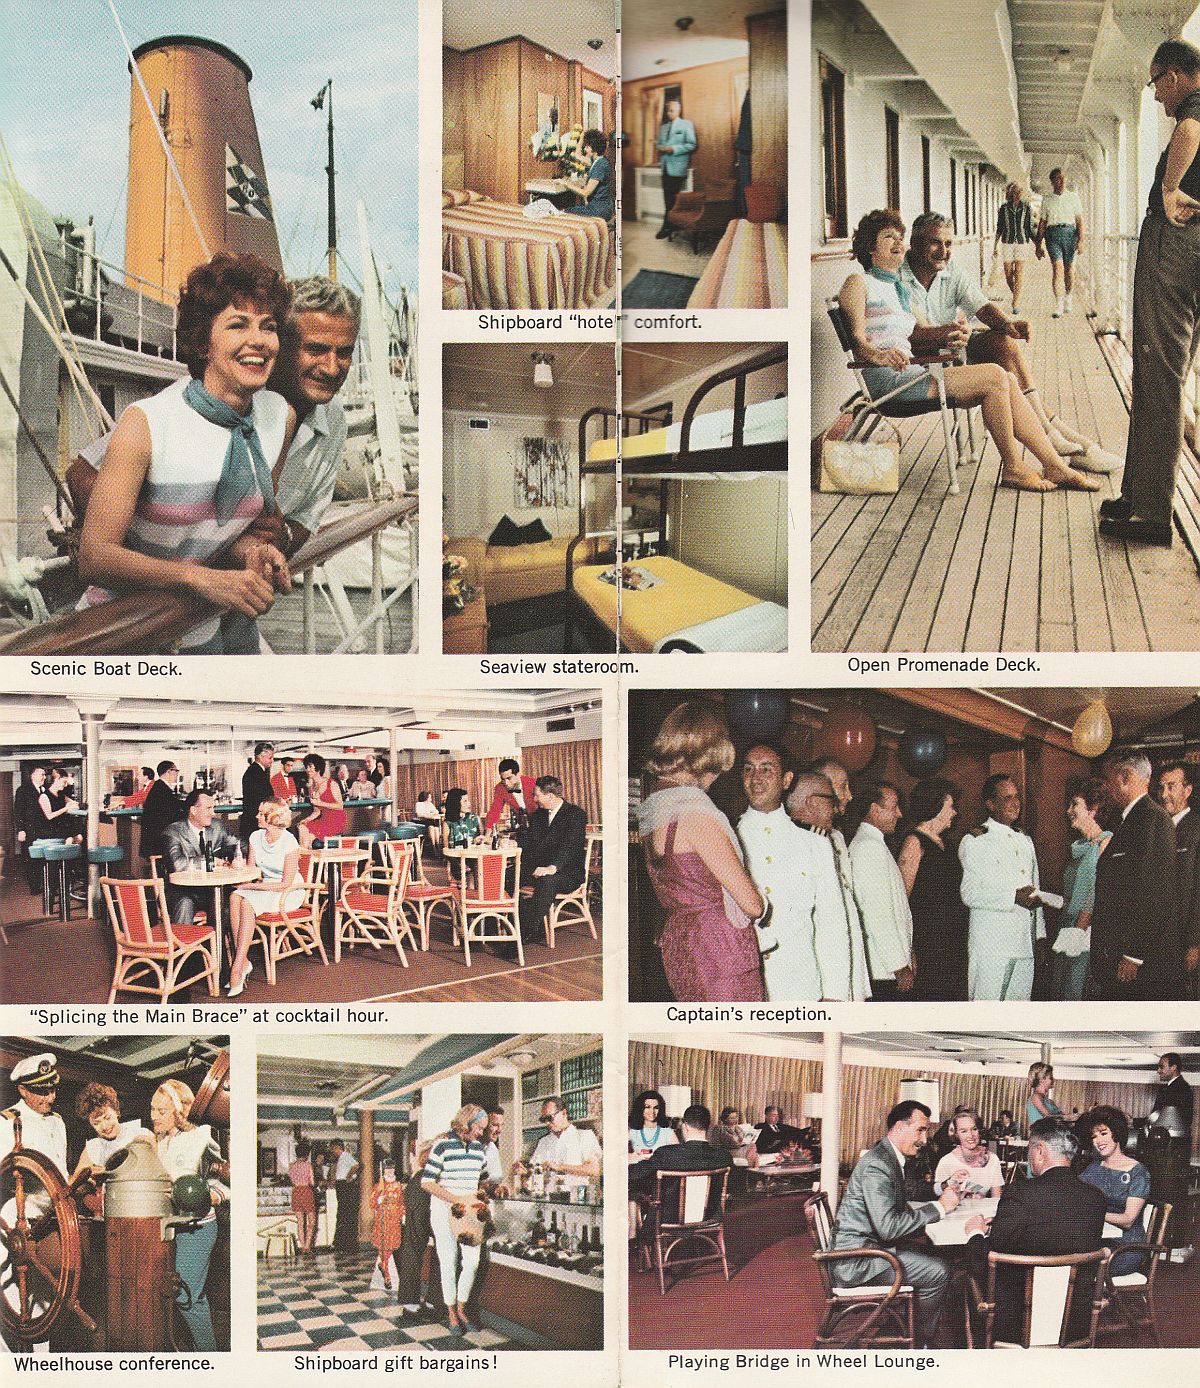 ss Florida Onboard ss Florida: Staterooms, Main Brace cocktail lounge, Wheel Lounge card room, open promenade, etc.